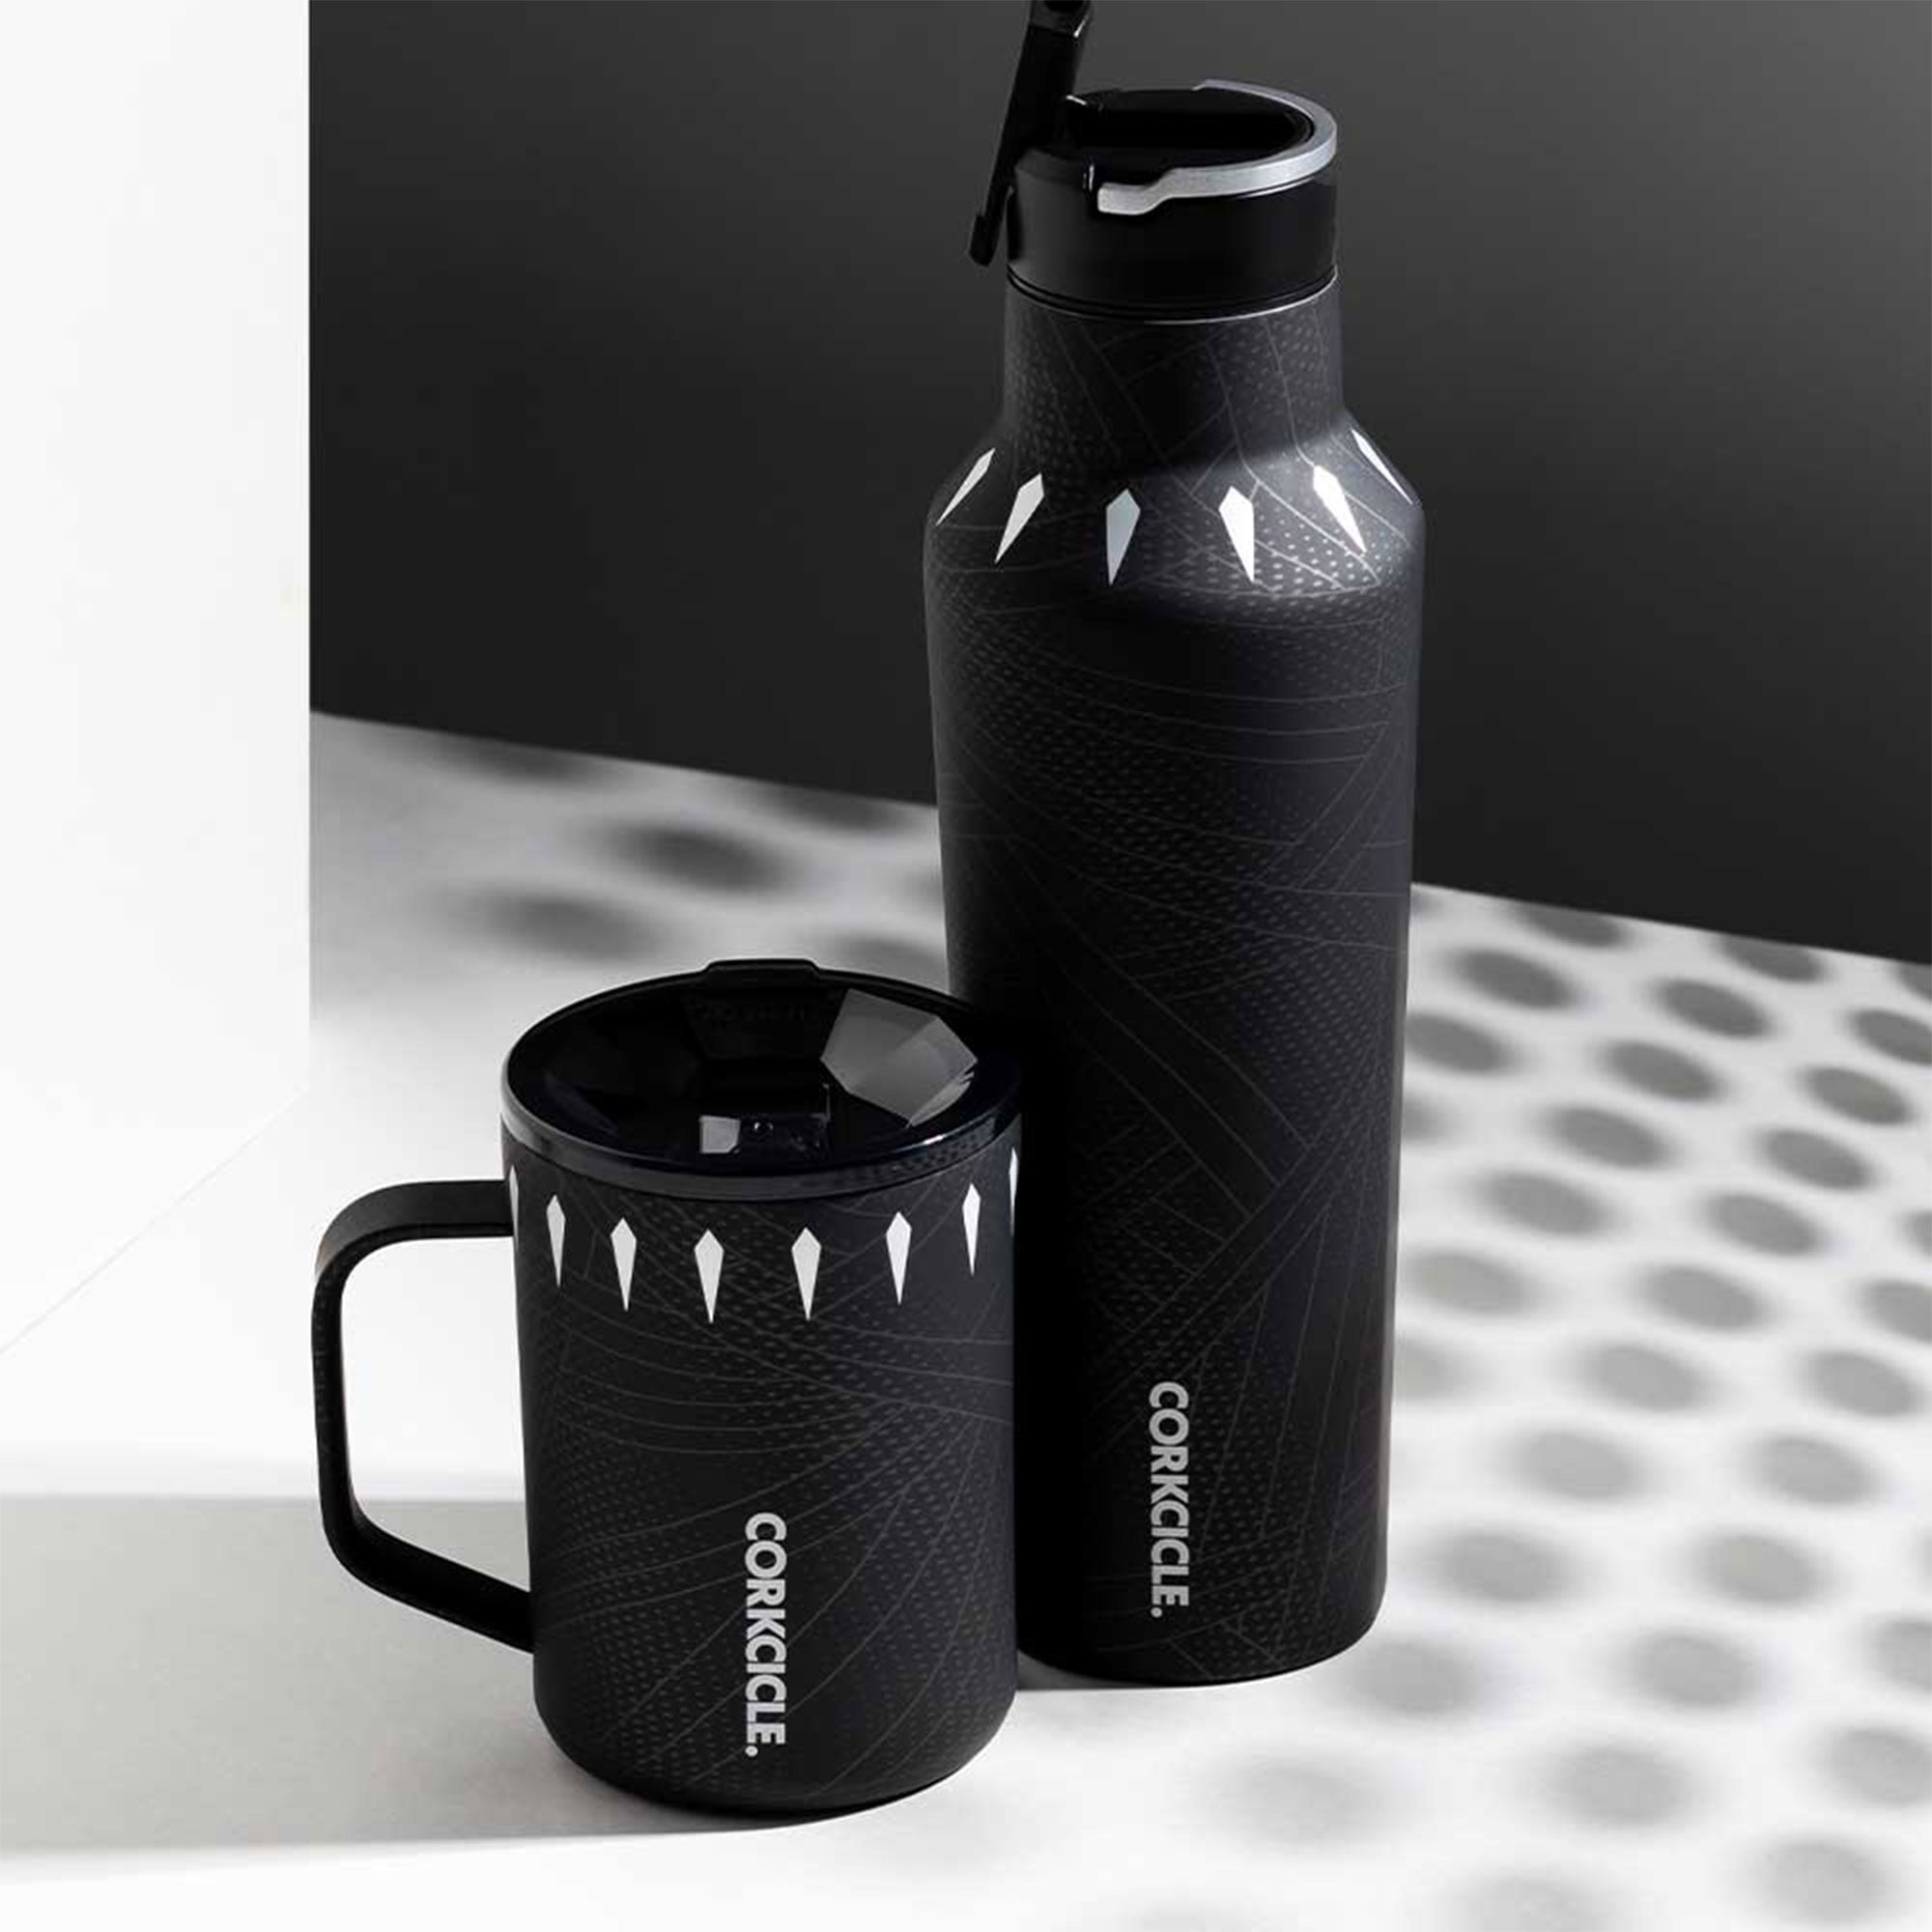 Corkcicle Sparkle 16 Ounce Coffee Mug Triple Insulated  Stainless Steel Cup with Clear Lid and Silicone Bottom for Hot Drinks,  Matte Black: Coffee Cups & Mugs